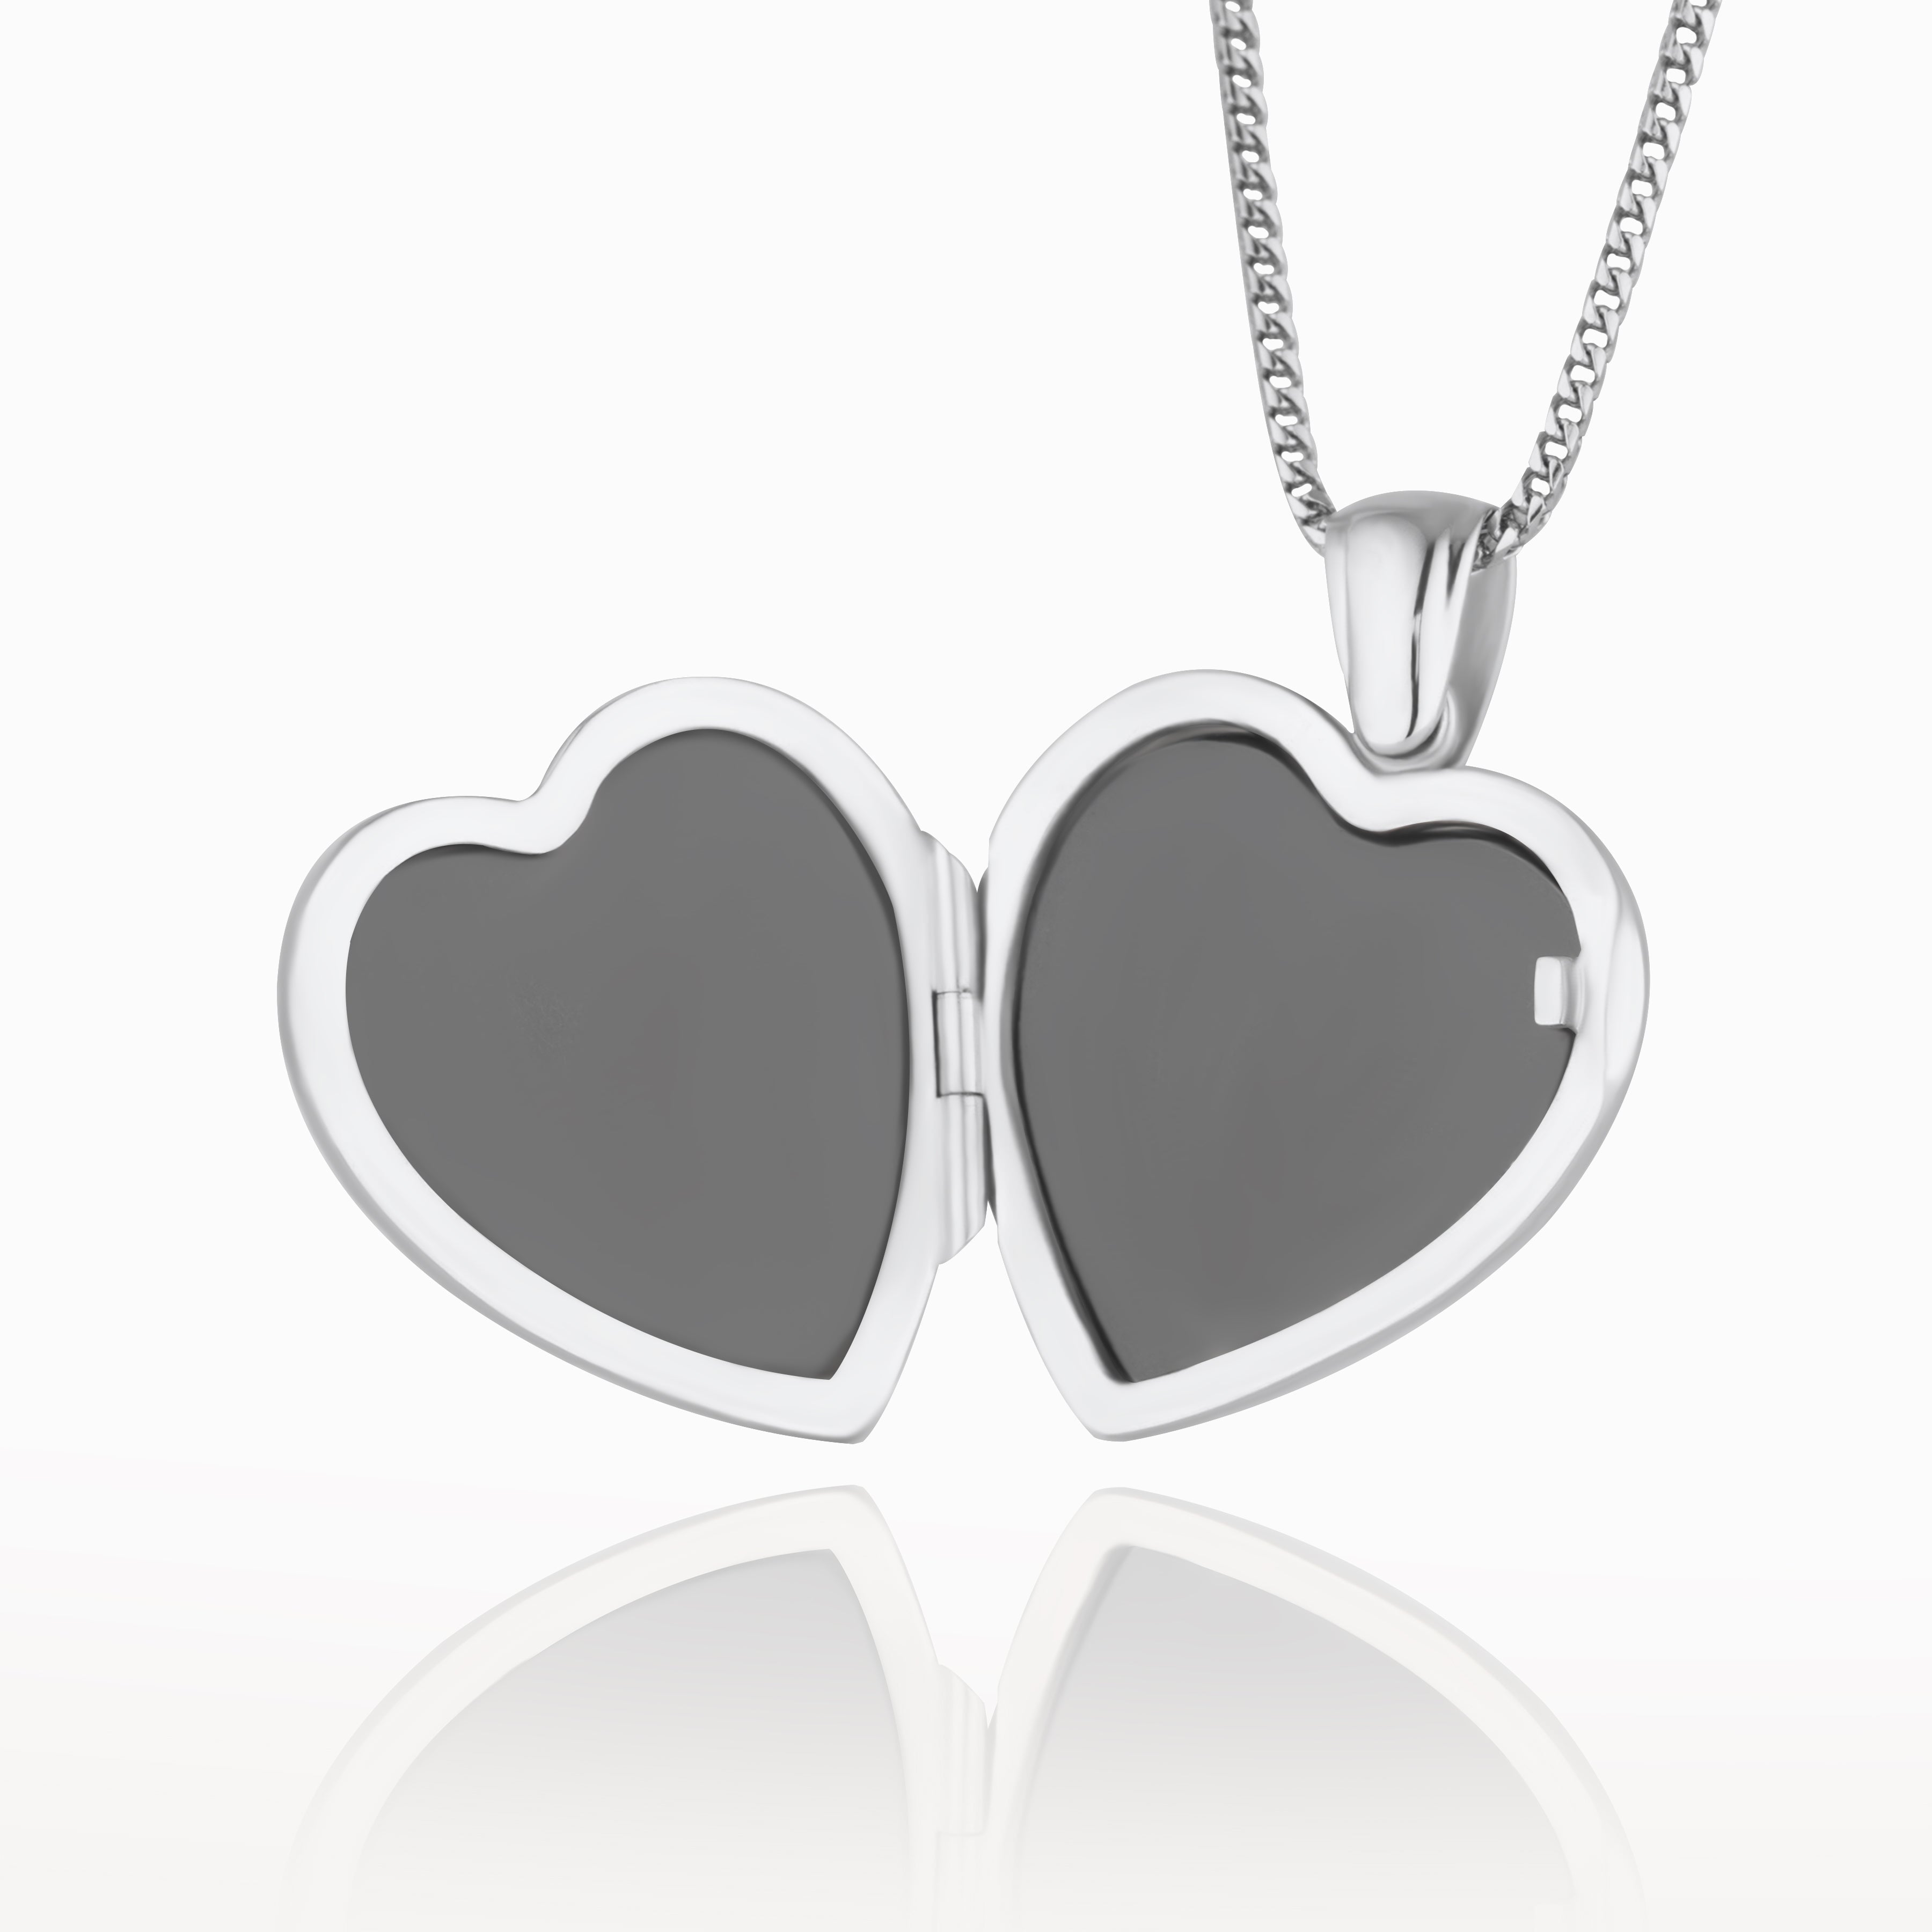 Product title: 18 ct Dazzling Starlight White Gold Locket, product type: Locket